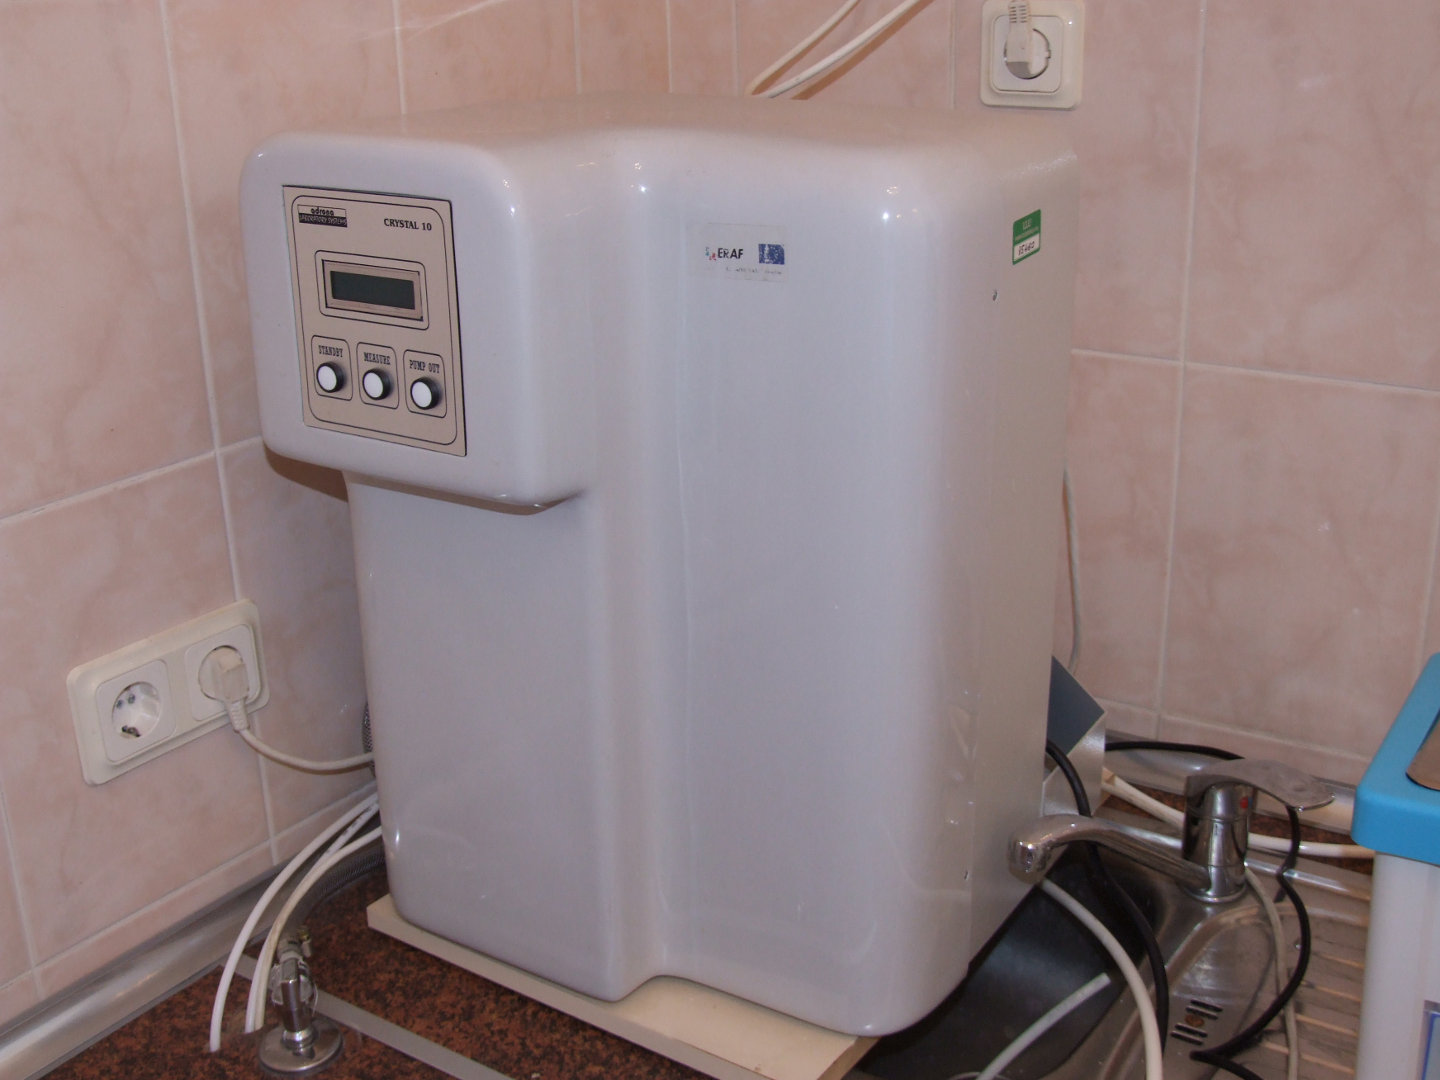 The Crystal Clinic water purification system